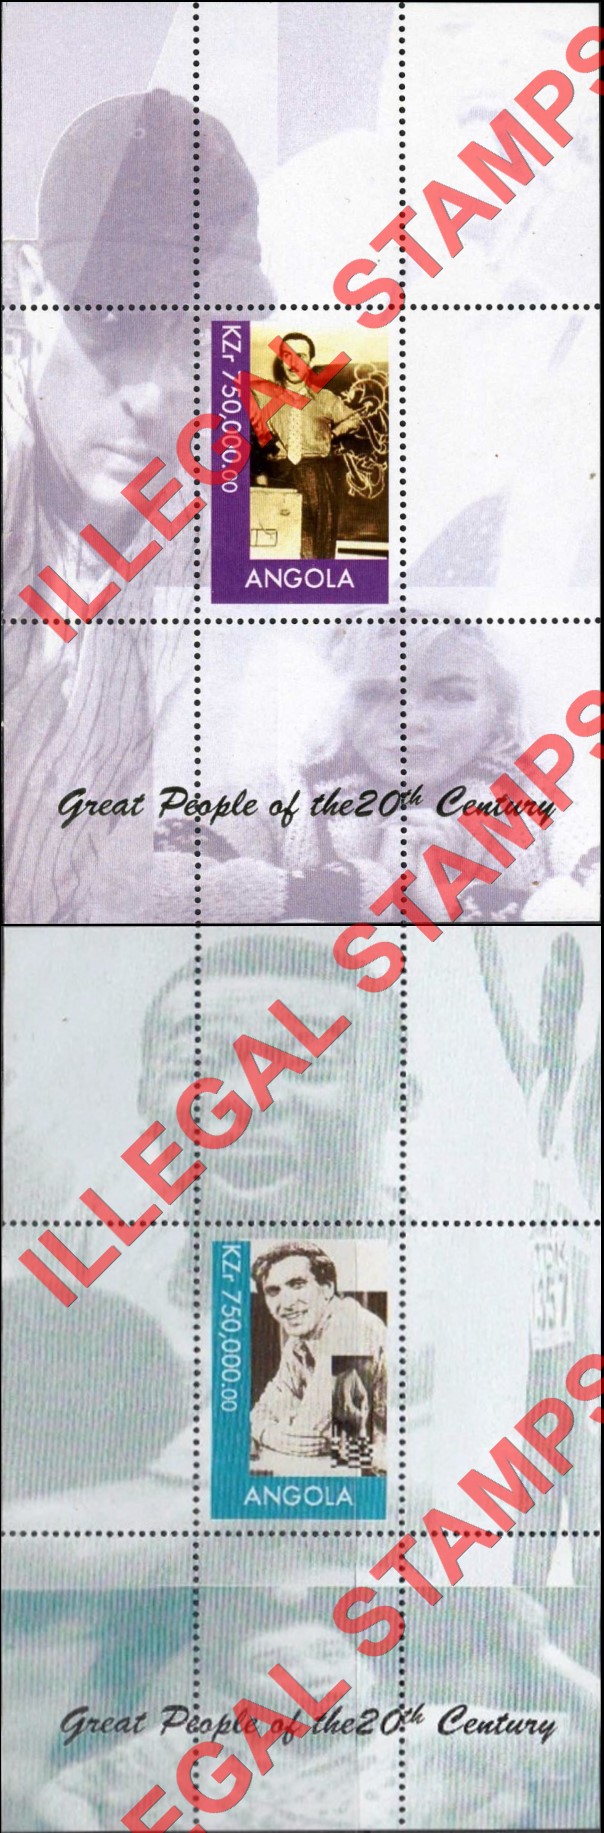 Angola 1999 Great People of the 20th Century Illegal Stamp Souvenir Sheets of 1